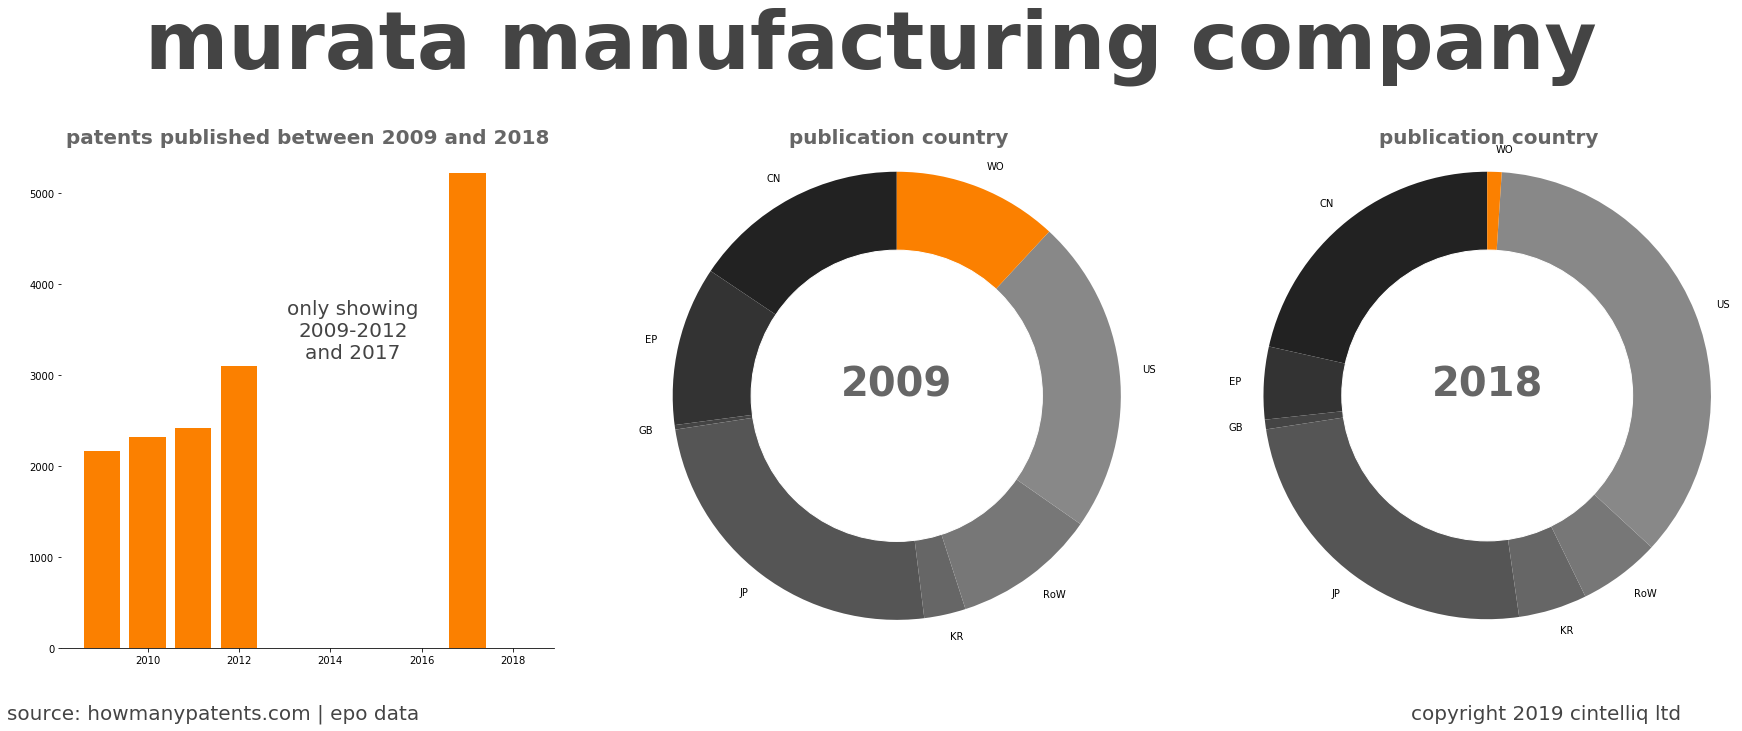 summary of patents for Murata Manufacturing Company